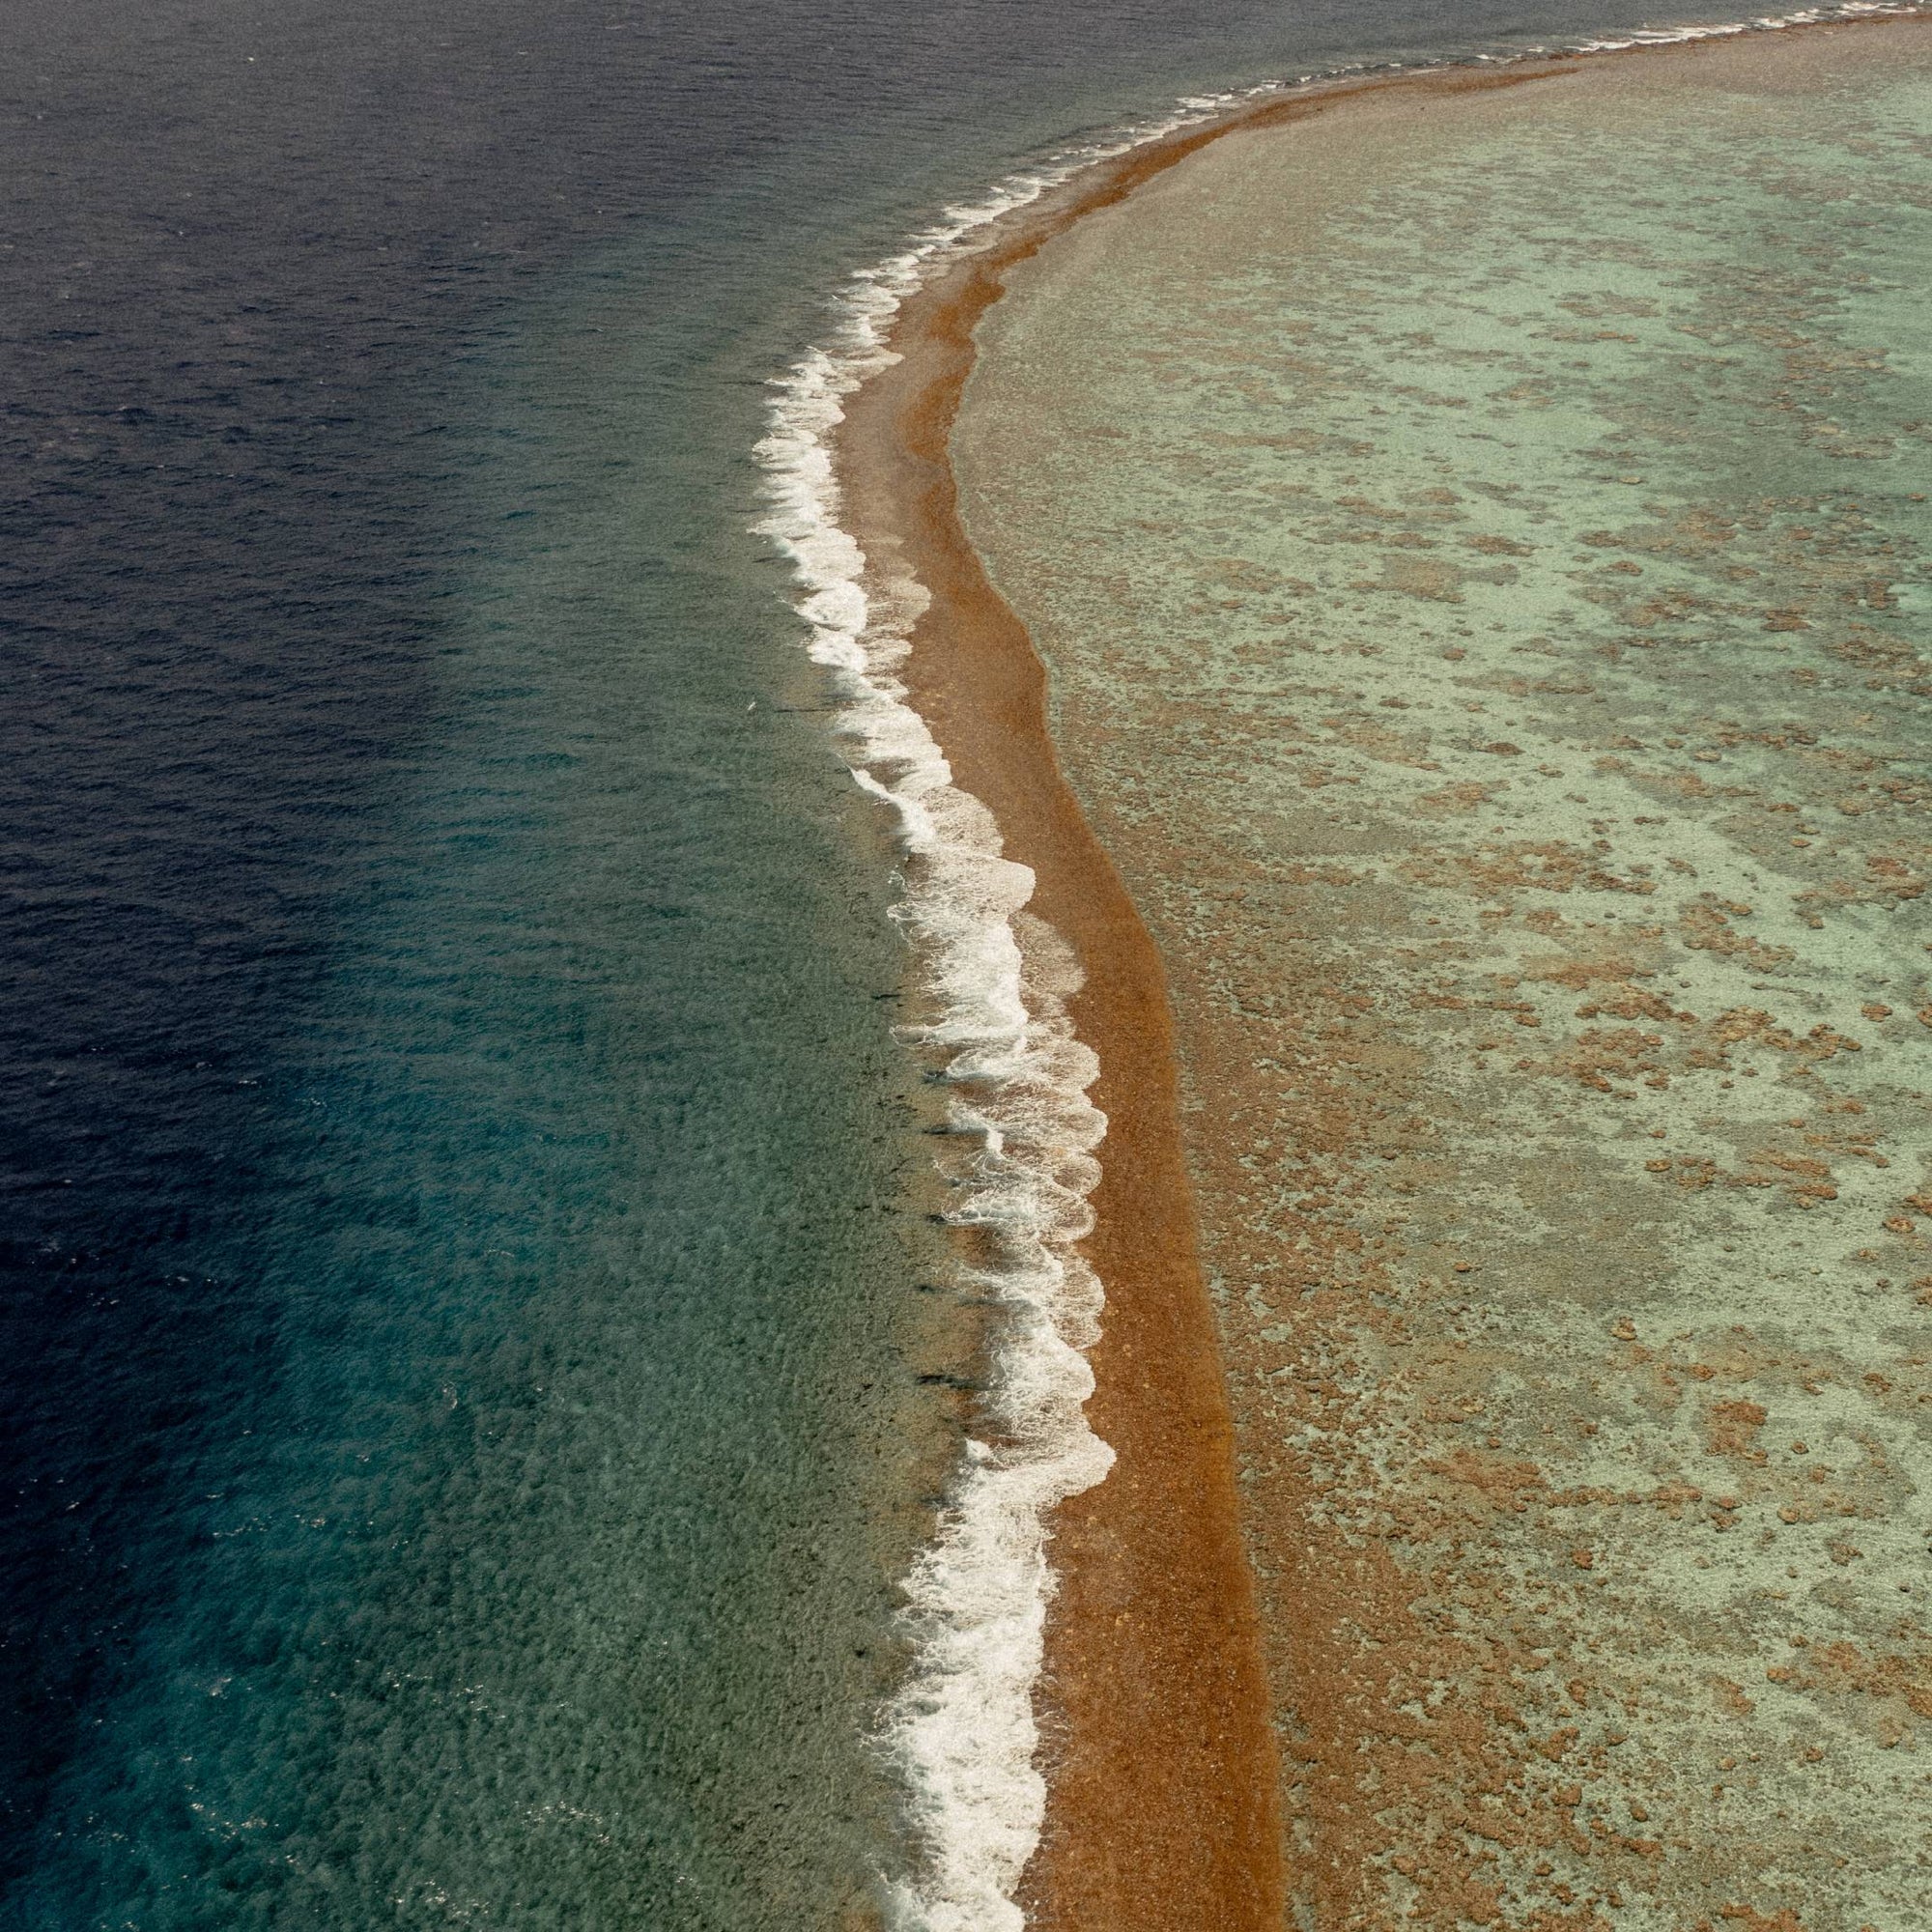 Waves hitting the shore in French Polynesia